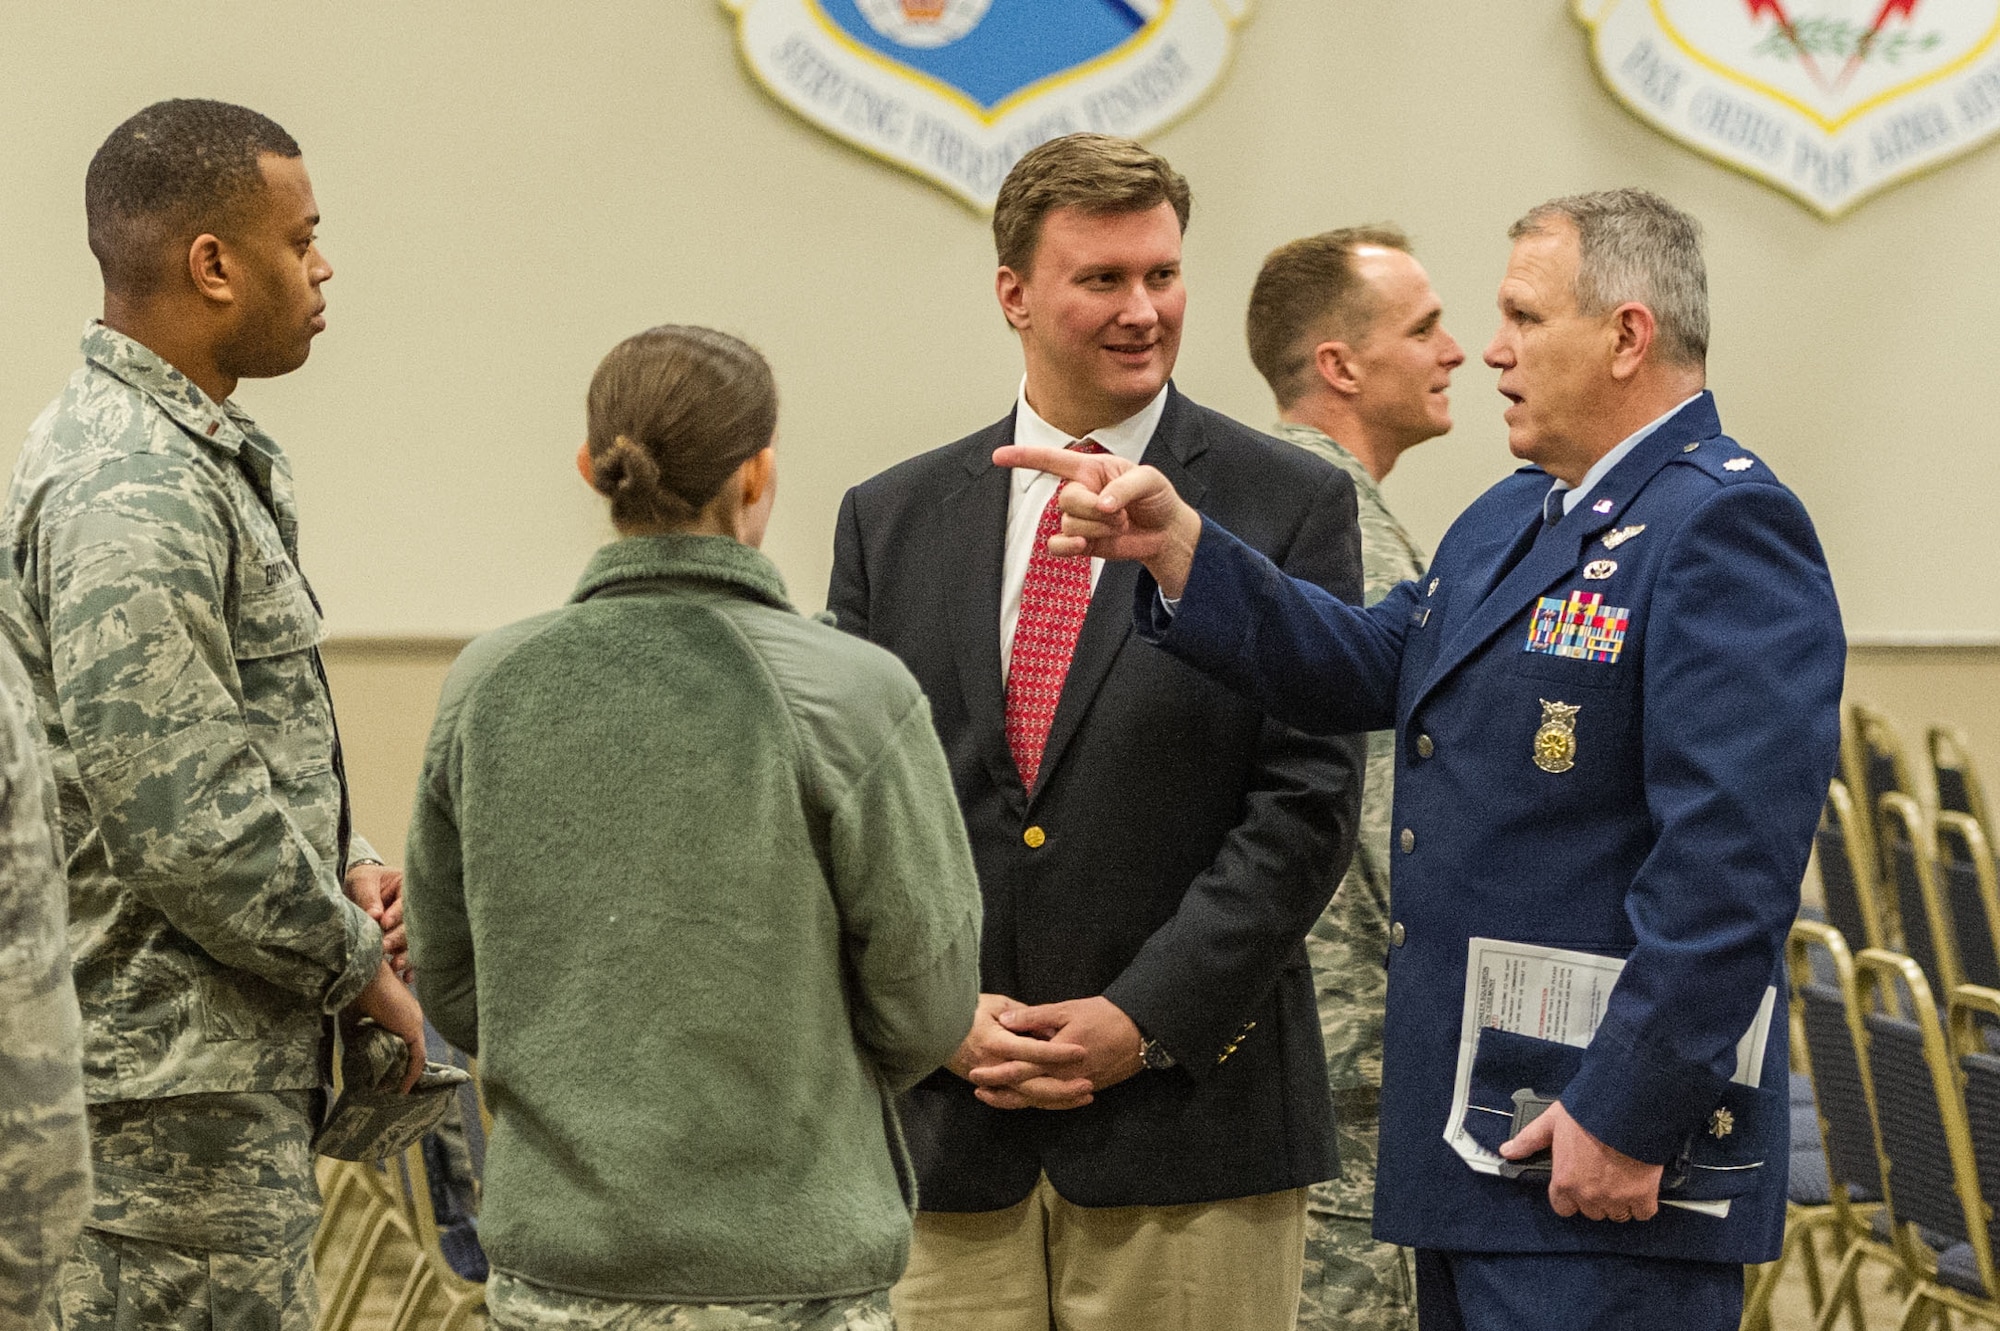 David R. Rockett, Jr., president of the Greater Bossier Economic Development Foundation, and Lt. Col. Alan Spiller, commander of the 307th Civil Engineer Squadron, talk with Airmen of the 307th CES before an honorary commander’s induction ceremony at Barksdale Air Force Base, Louisiana, March 3, 2018.